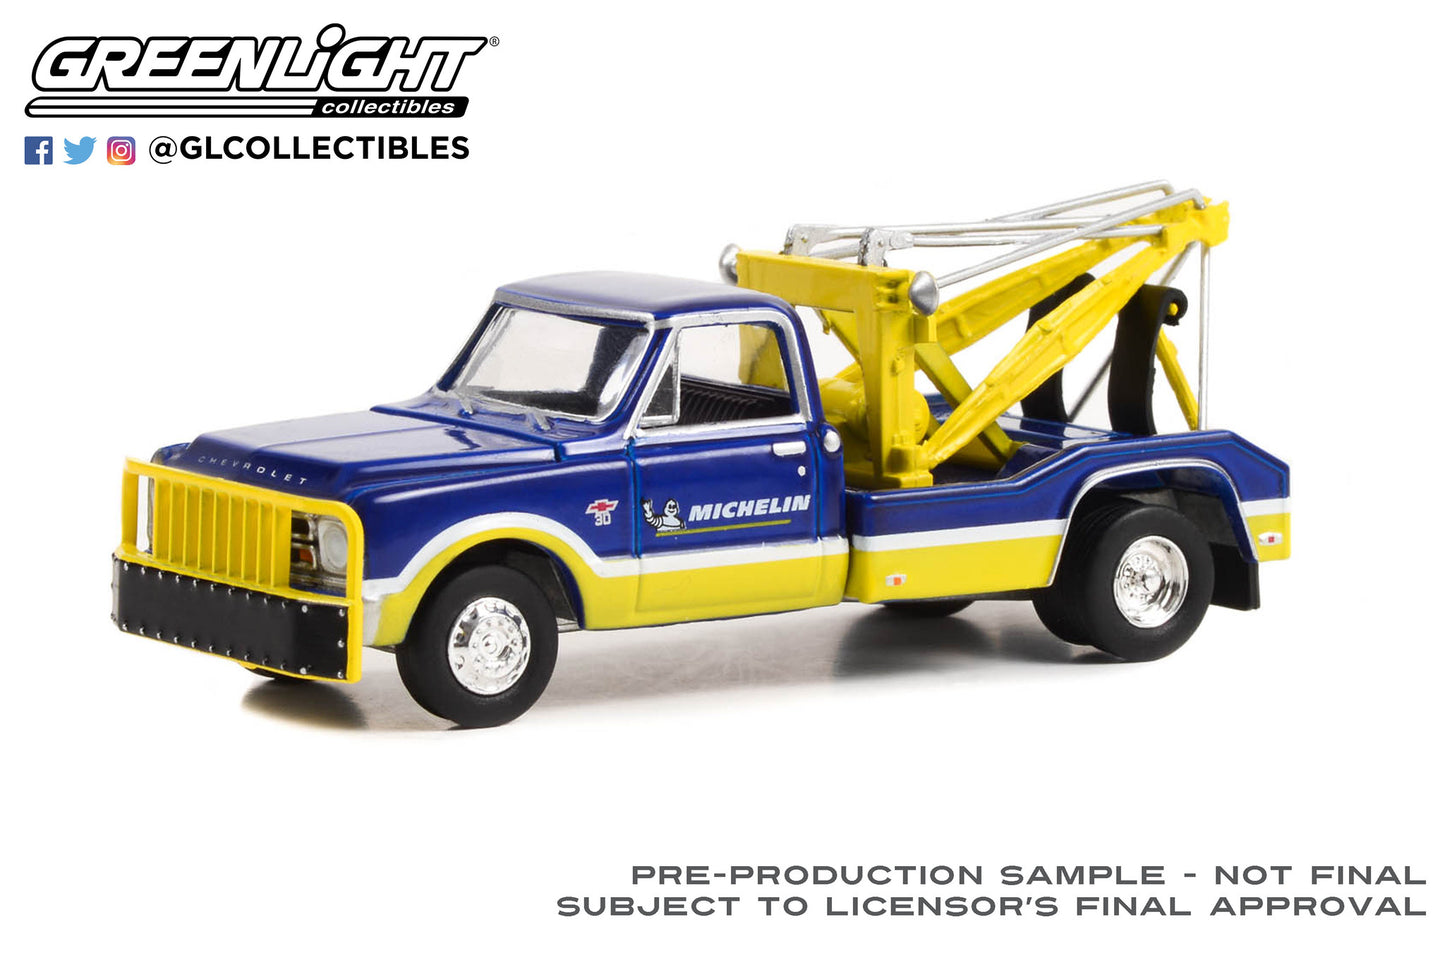 GreenLight 1:64 Dually Drivers Series 11 - 1967 Chevrolet C-30 Dually Wrecker - Michelin Service Center 46110-A